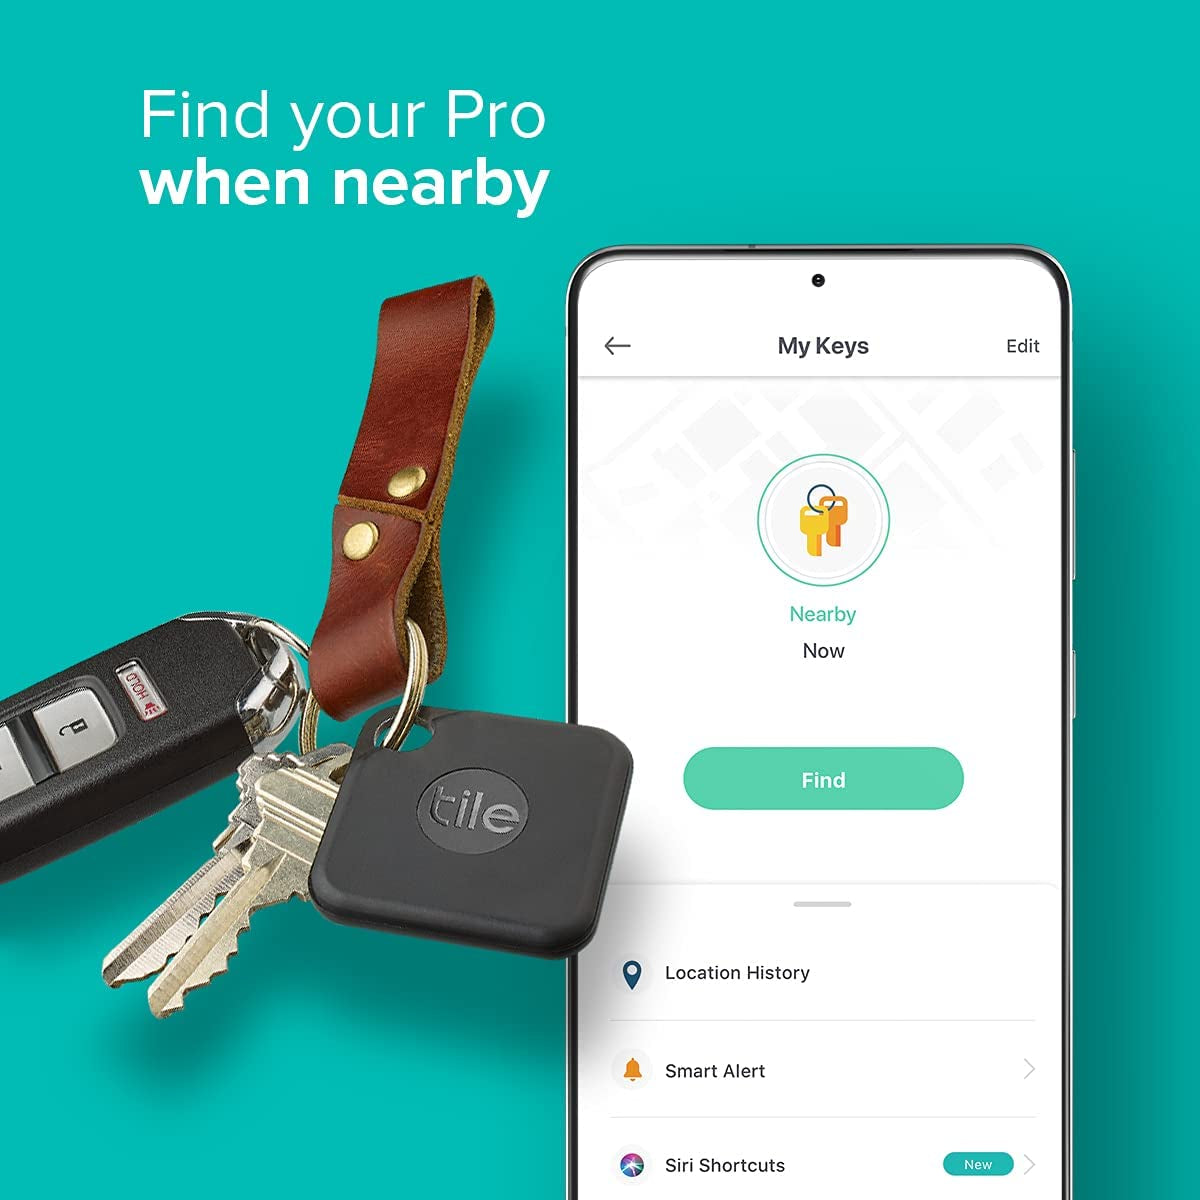 Pro (2020) 2-Pack - High Performance Bluetooth Tracker, Keys Finder and Item Locator for Keys, Bags, and More; 400 Ft Range, Water Resistance and 1 Year Replaceable Battery